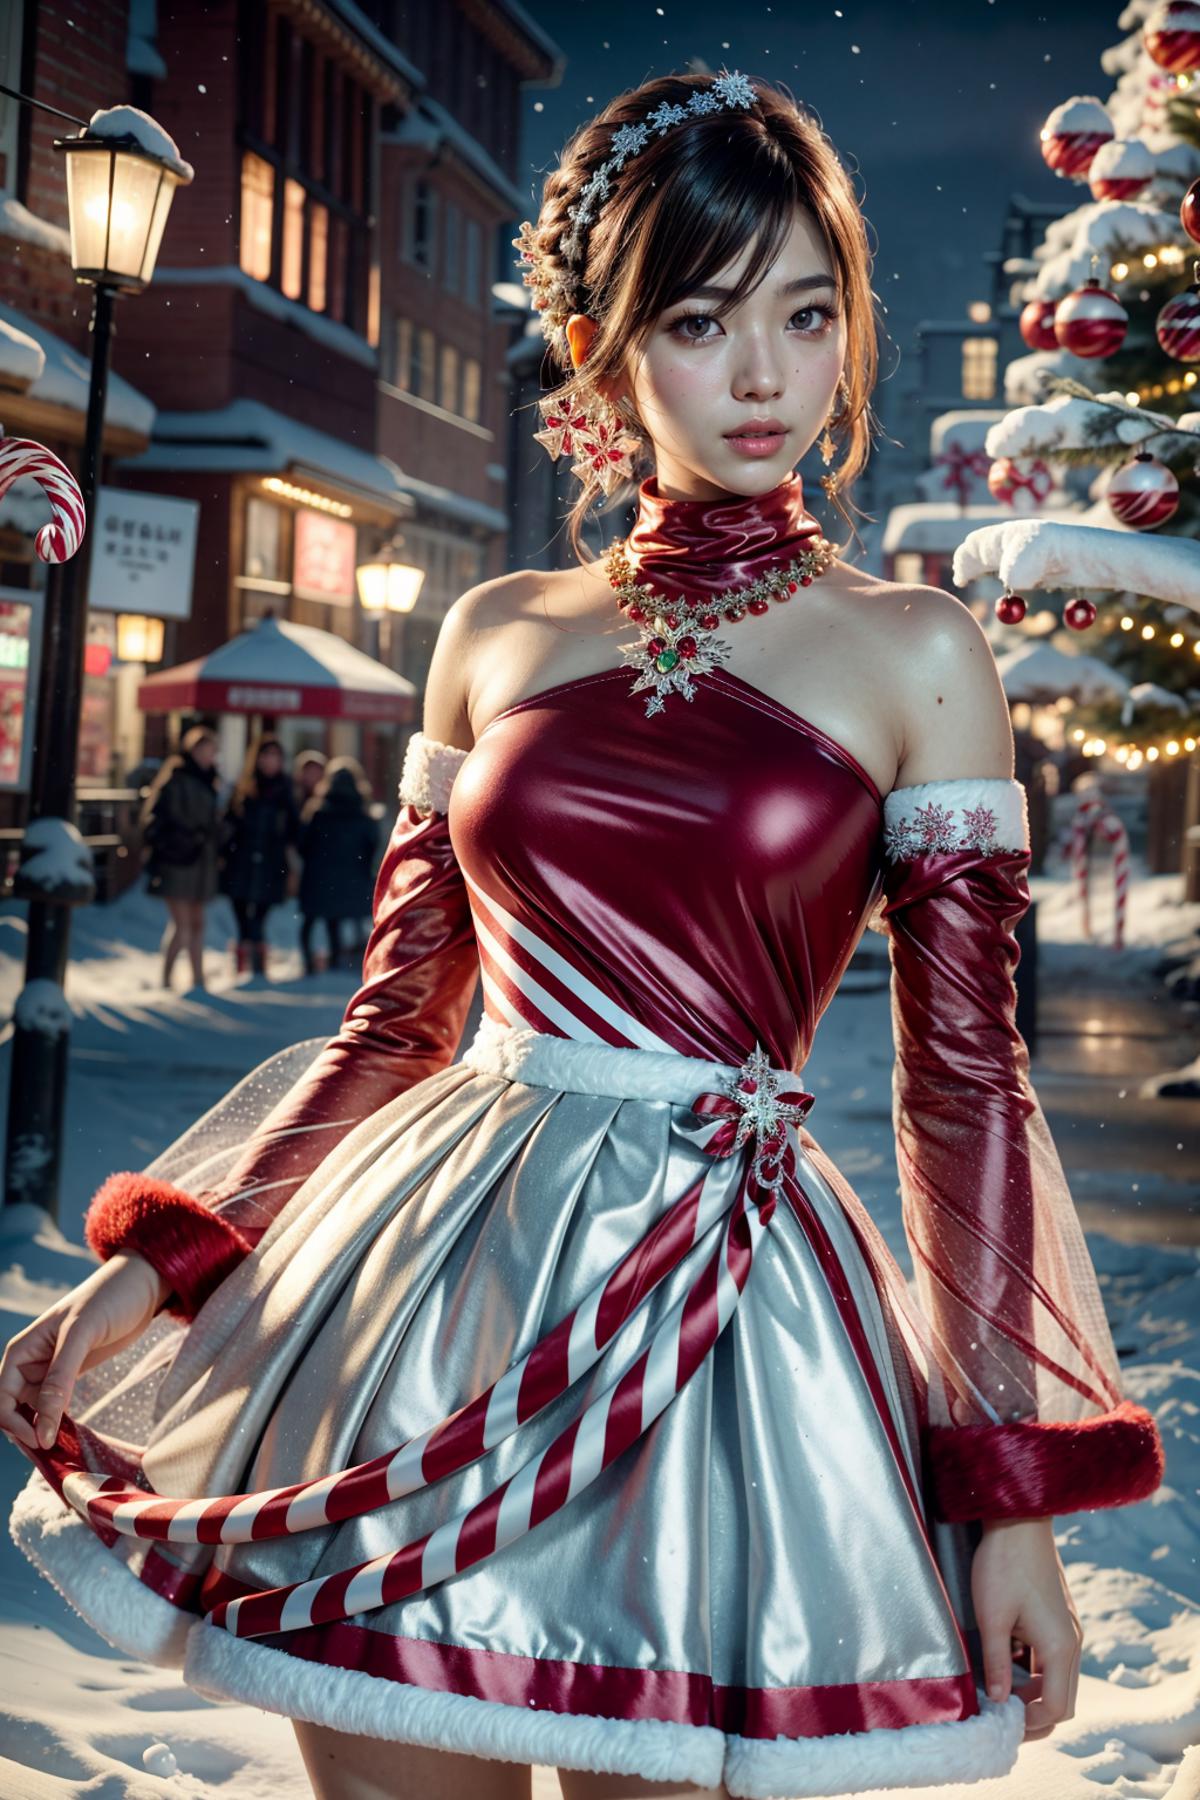 A woman in a red dress with a white belt and a bow in her hair posing in the snow.